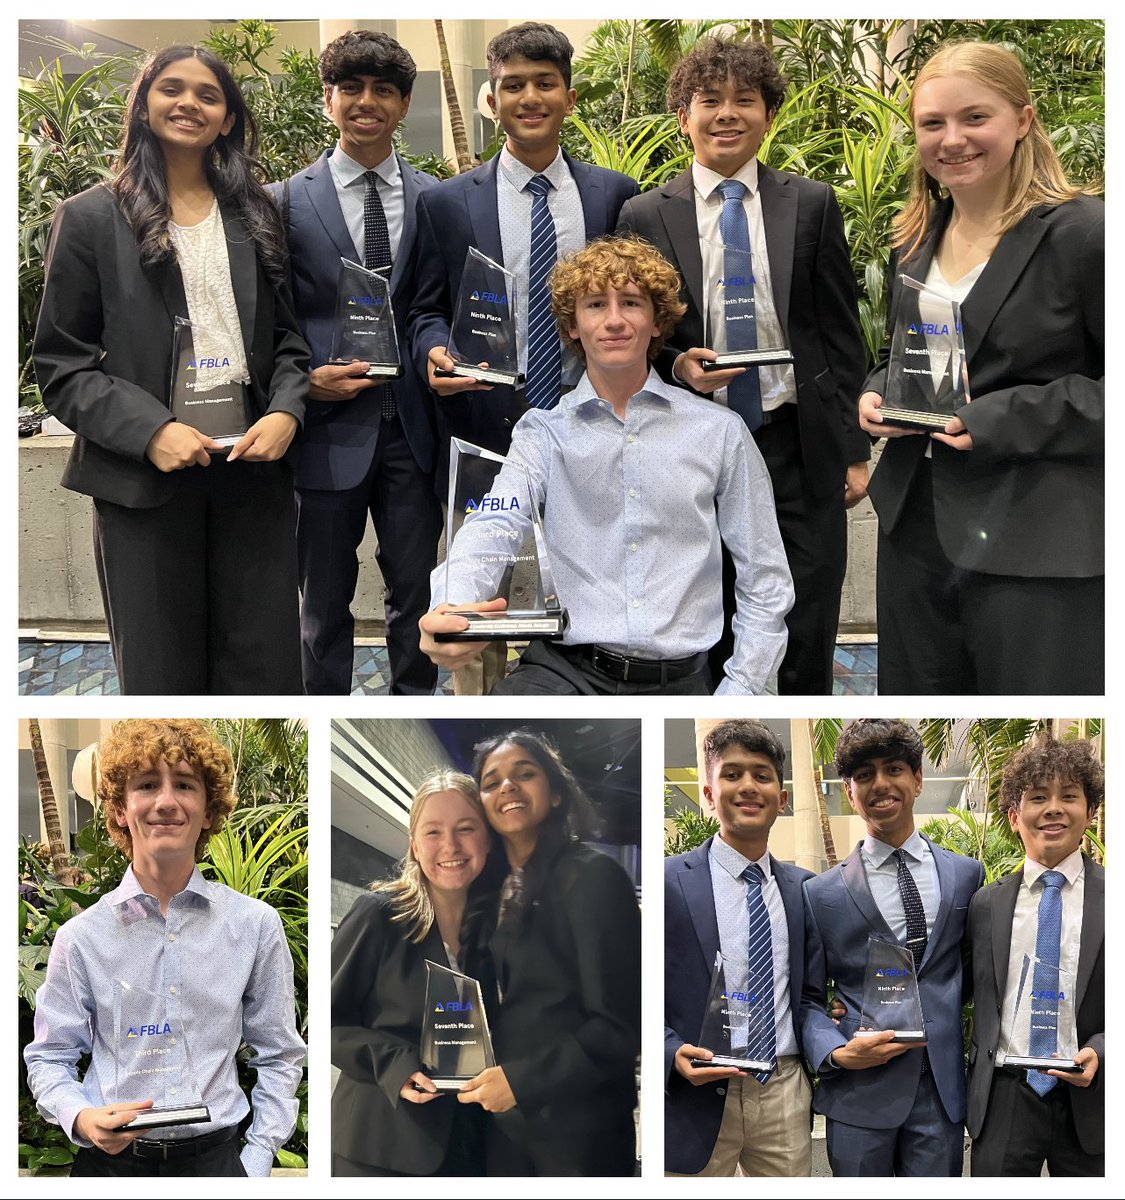 Congrats to the VHHS FBLA team members who received honors @ the Nat'l Leadership Conf in Atlanta: -Cameron Keogh--3rd in Supply Chain Management -Emma Hoffman & Sahaana Kathirvel--7th in Business Management -Purab Arora, Matthew Ju & Neil Mody-Deshmukh -- 9th in Business Plan